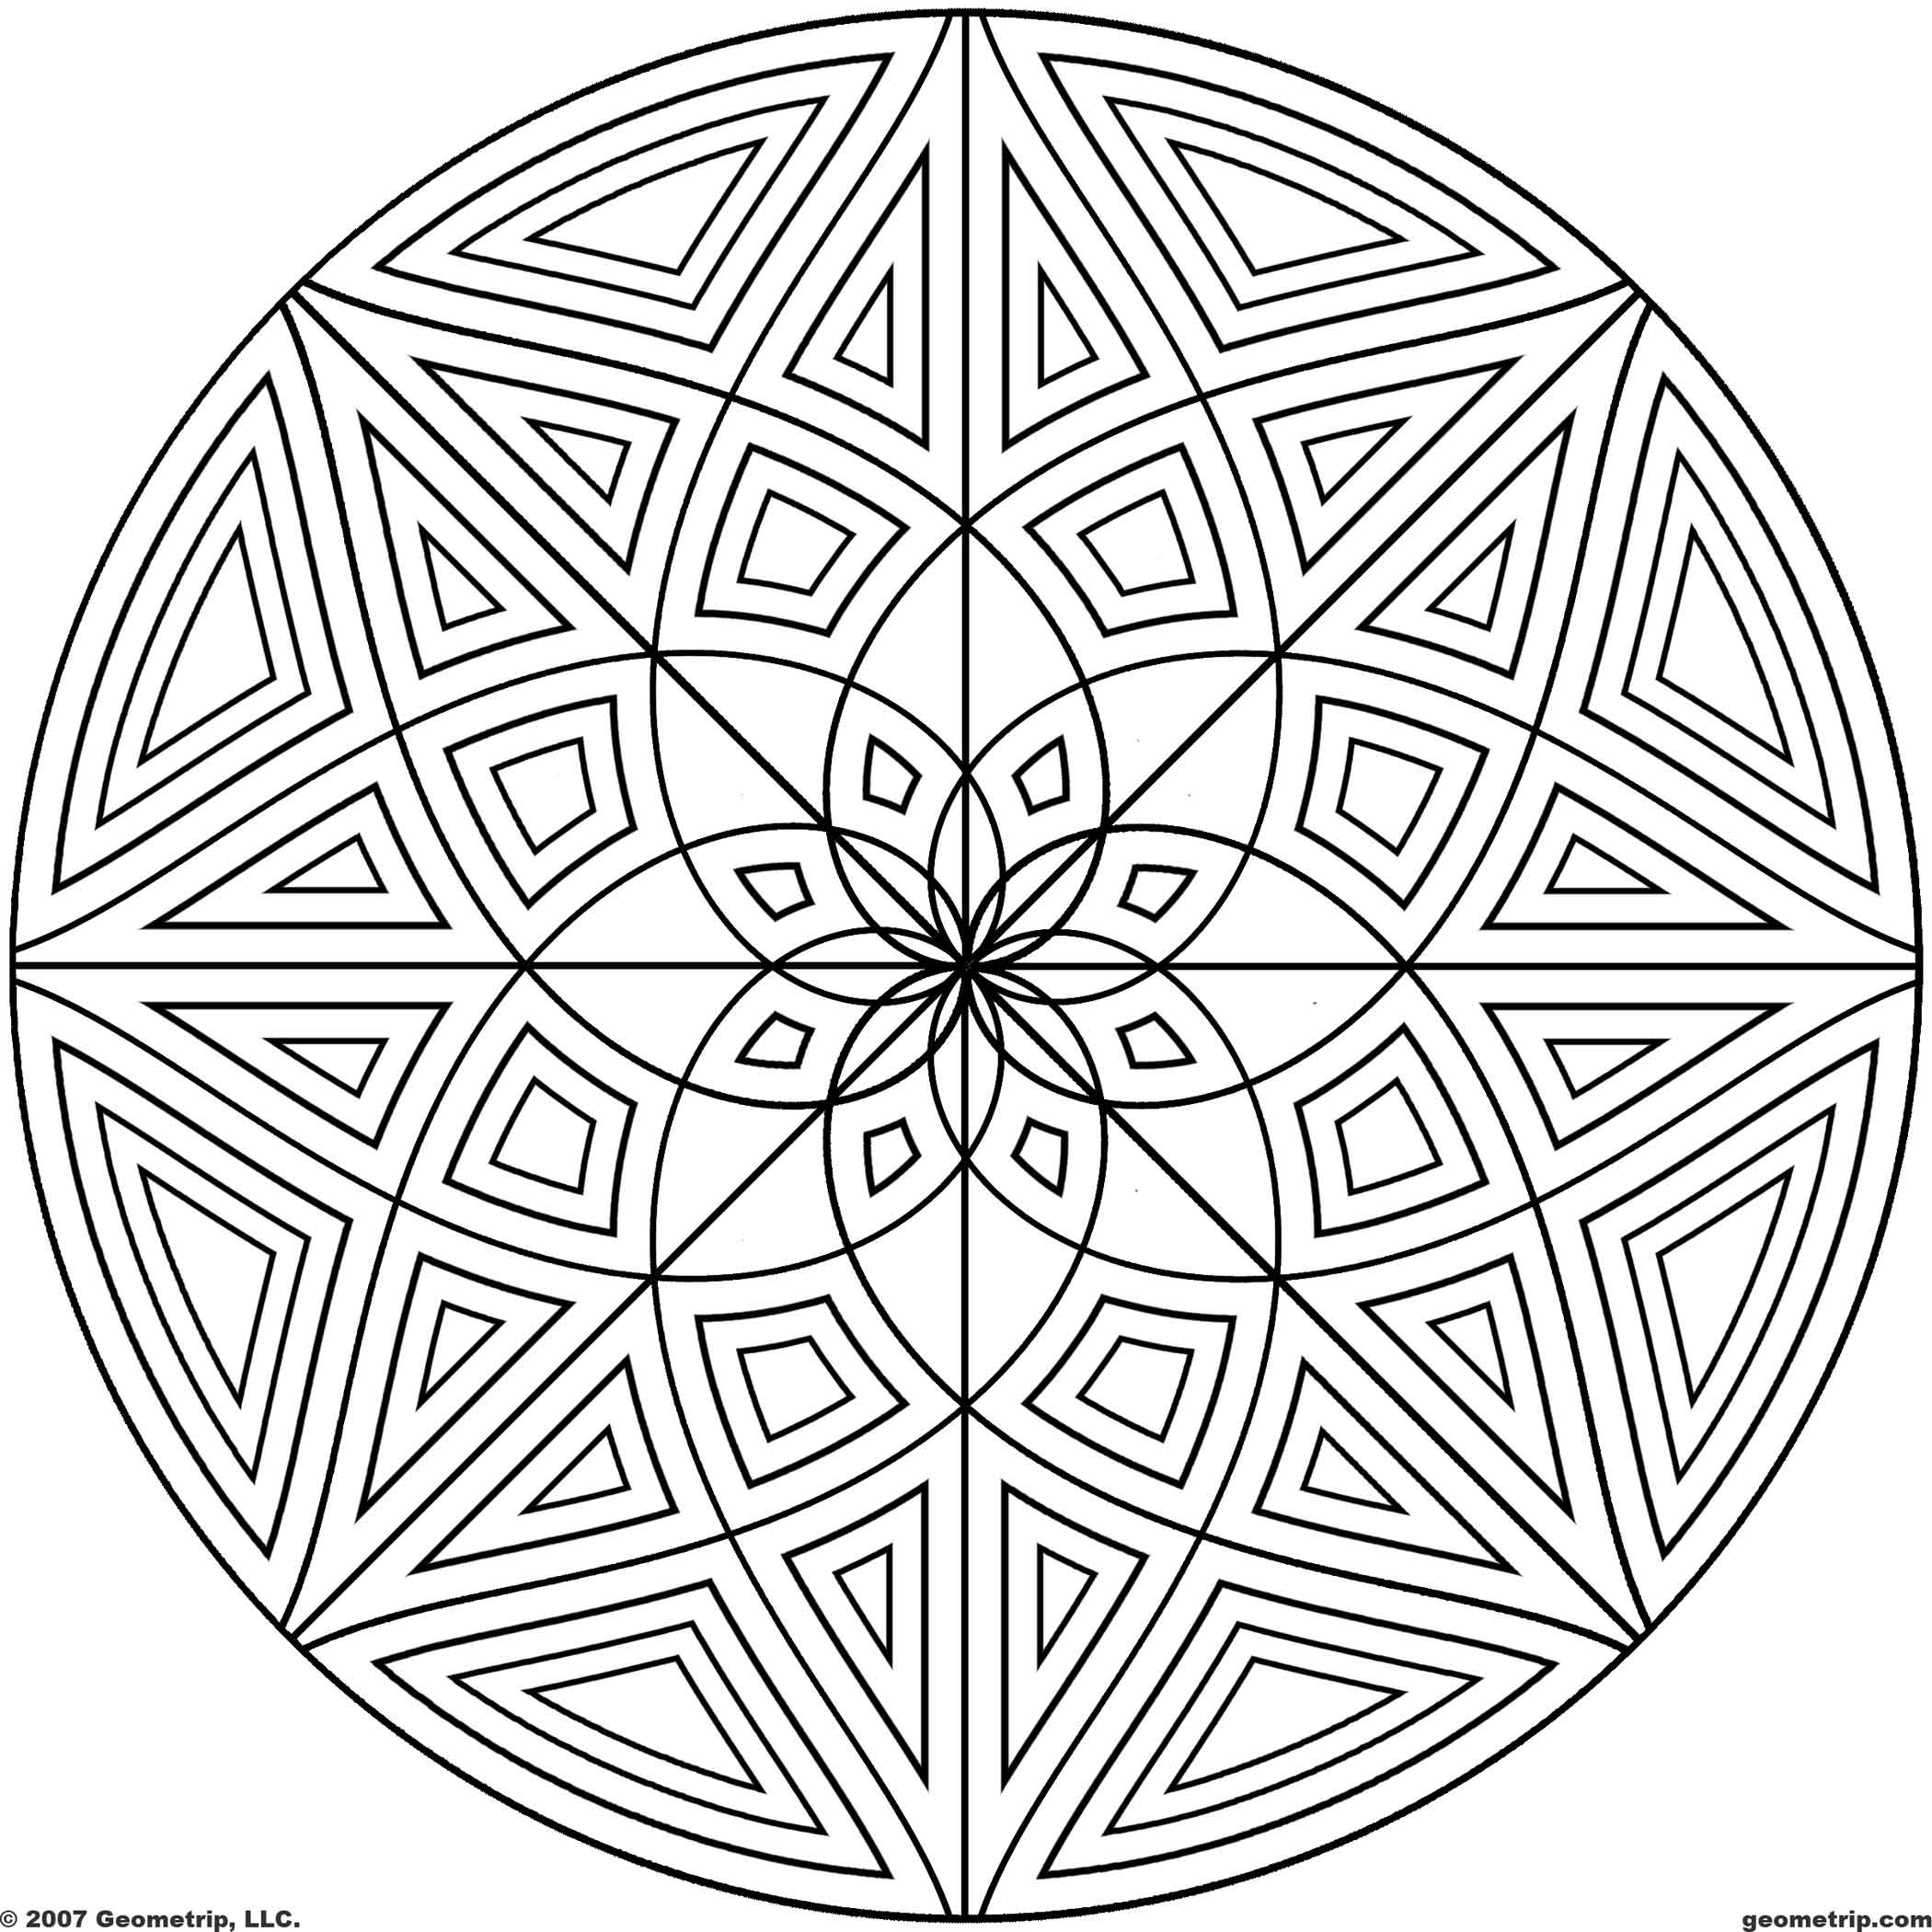 Cool Patterns To Color - Coloring Pages for Kids and for Adults